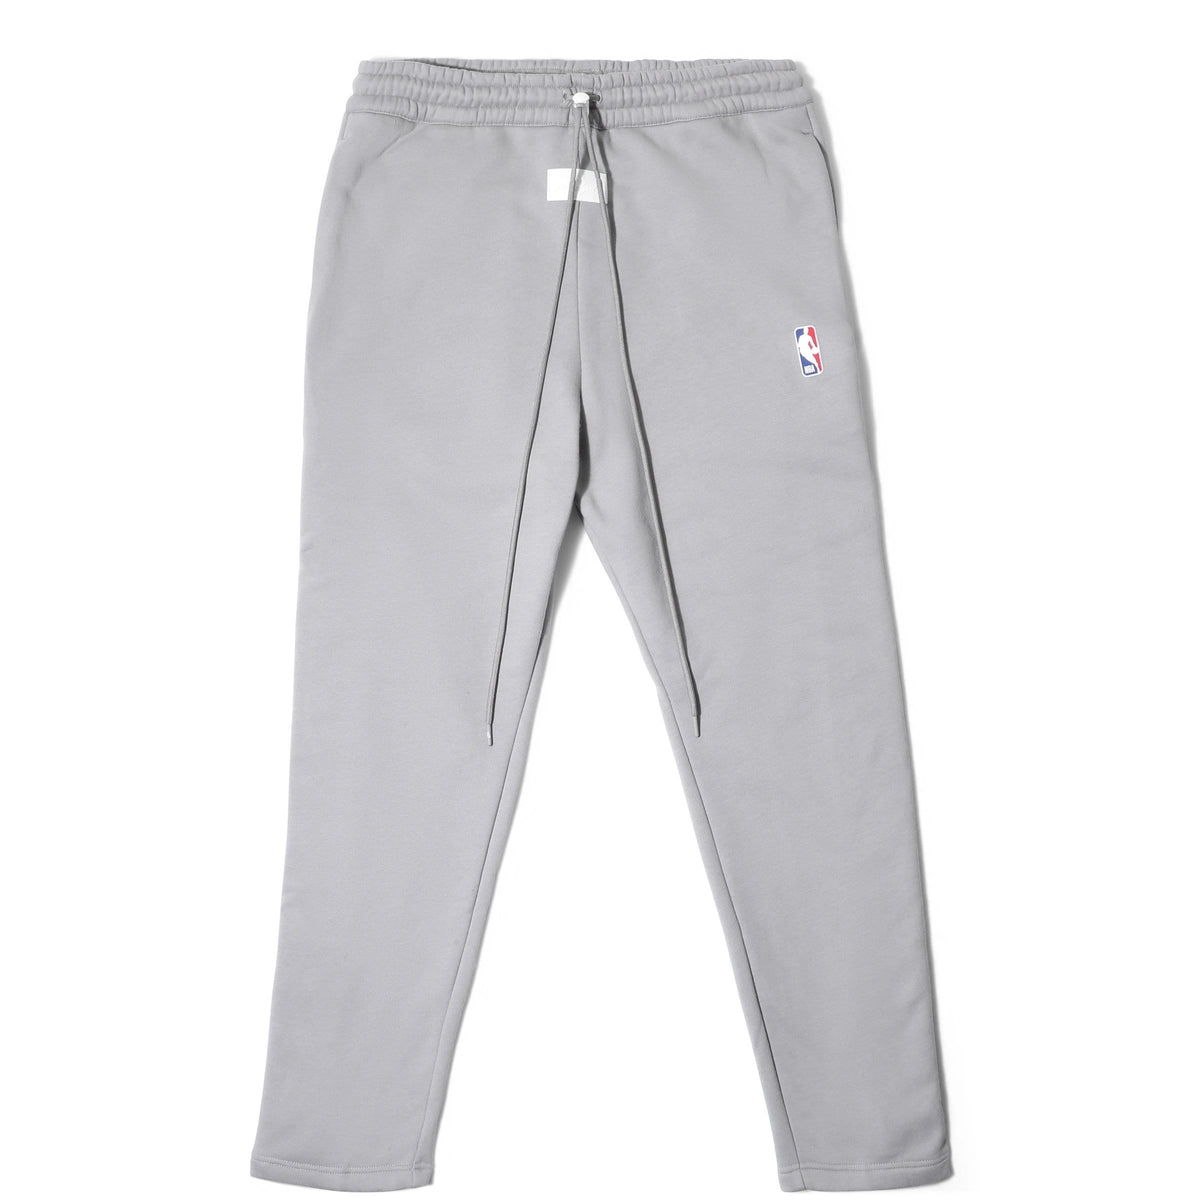 x Fear of God WARM UP PANT BV5791 003 